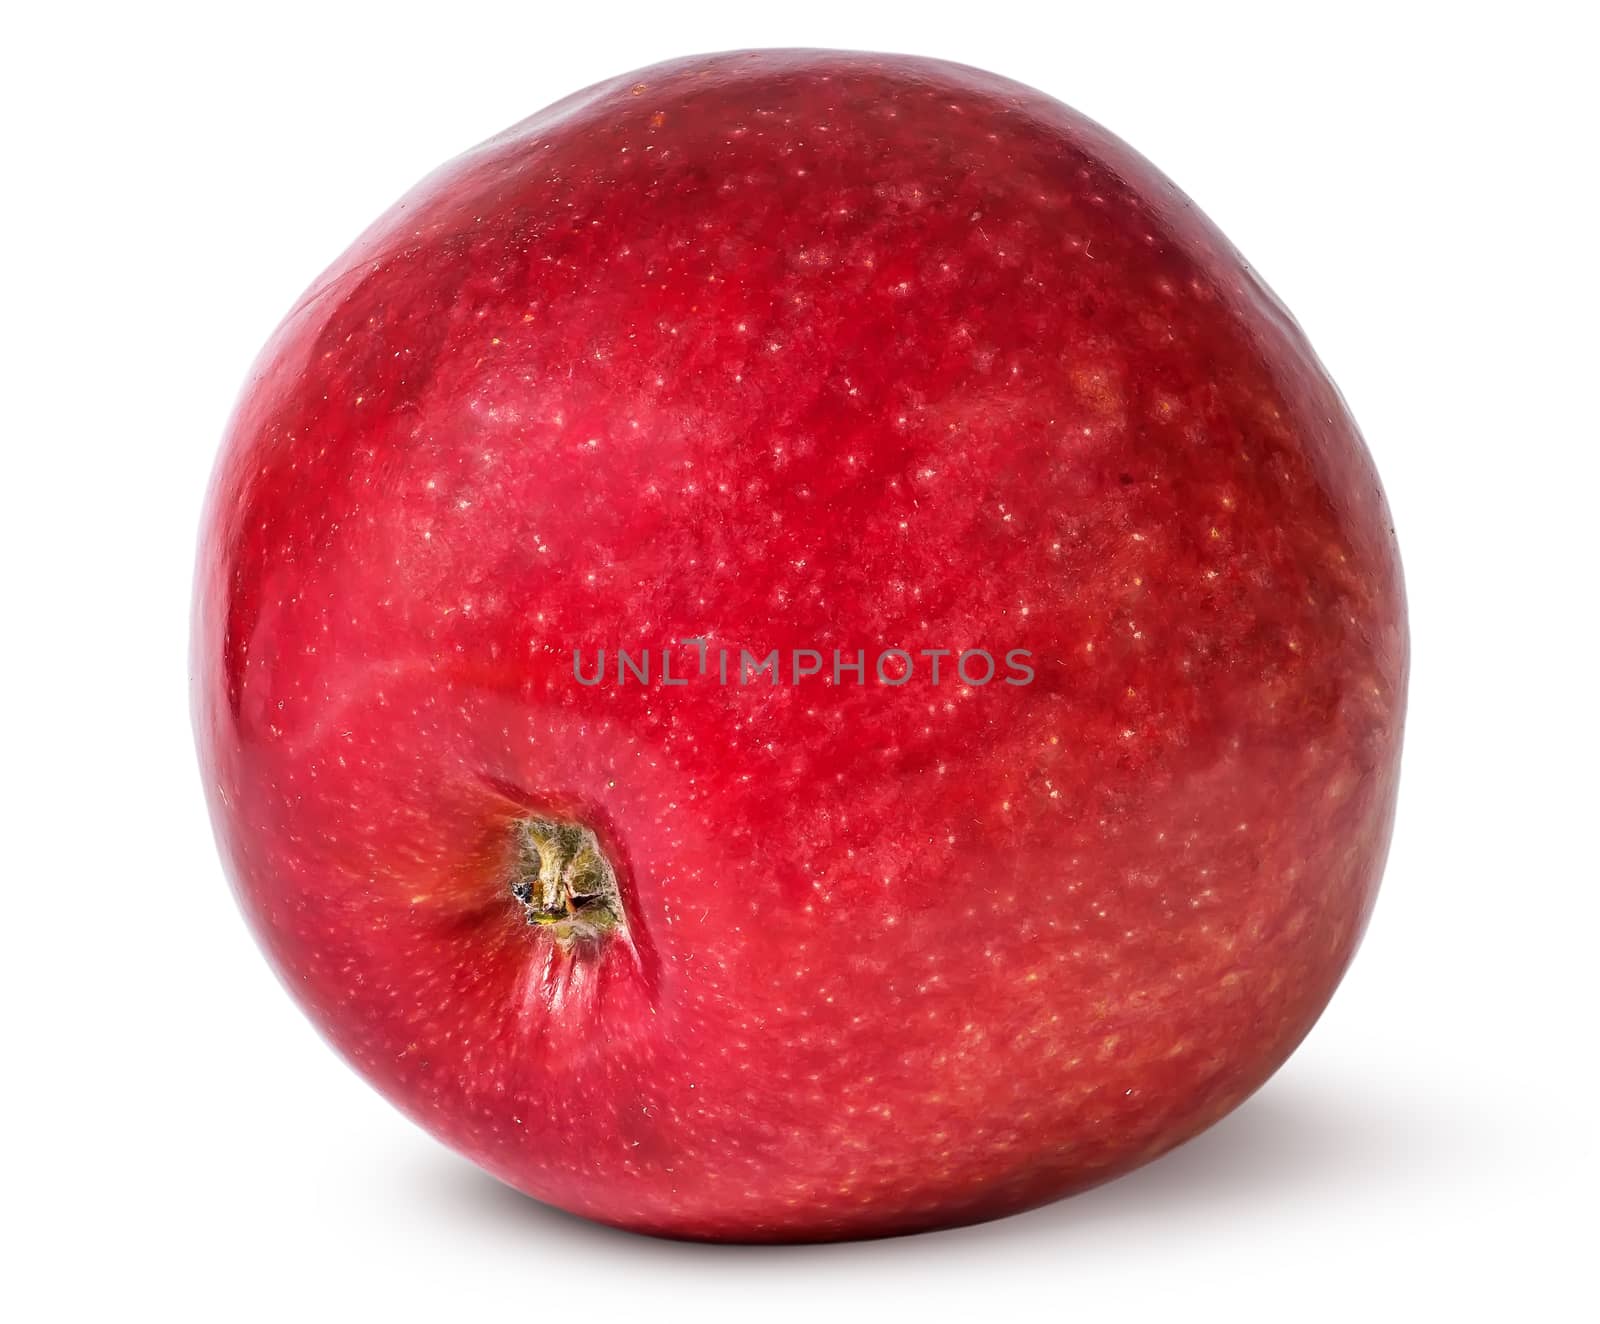 Red ripe apple bottom view isolated on white background